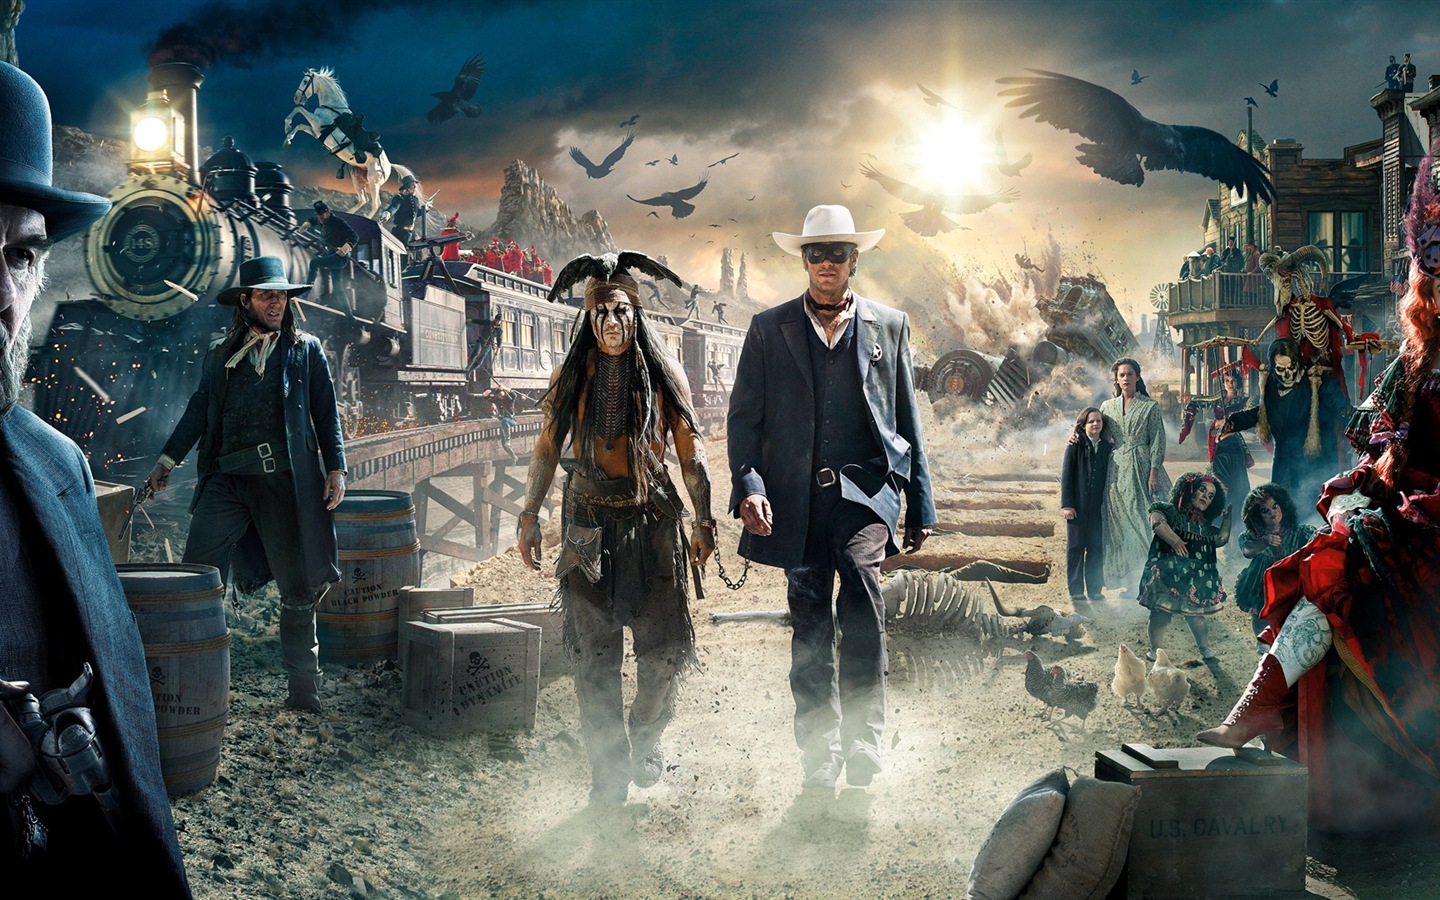 The Lone Ranger HD movie wallpapers #20 - 1440x900